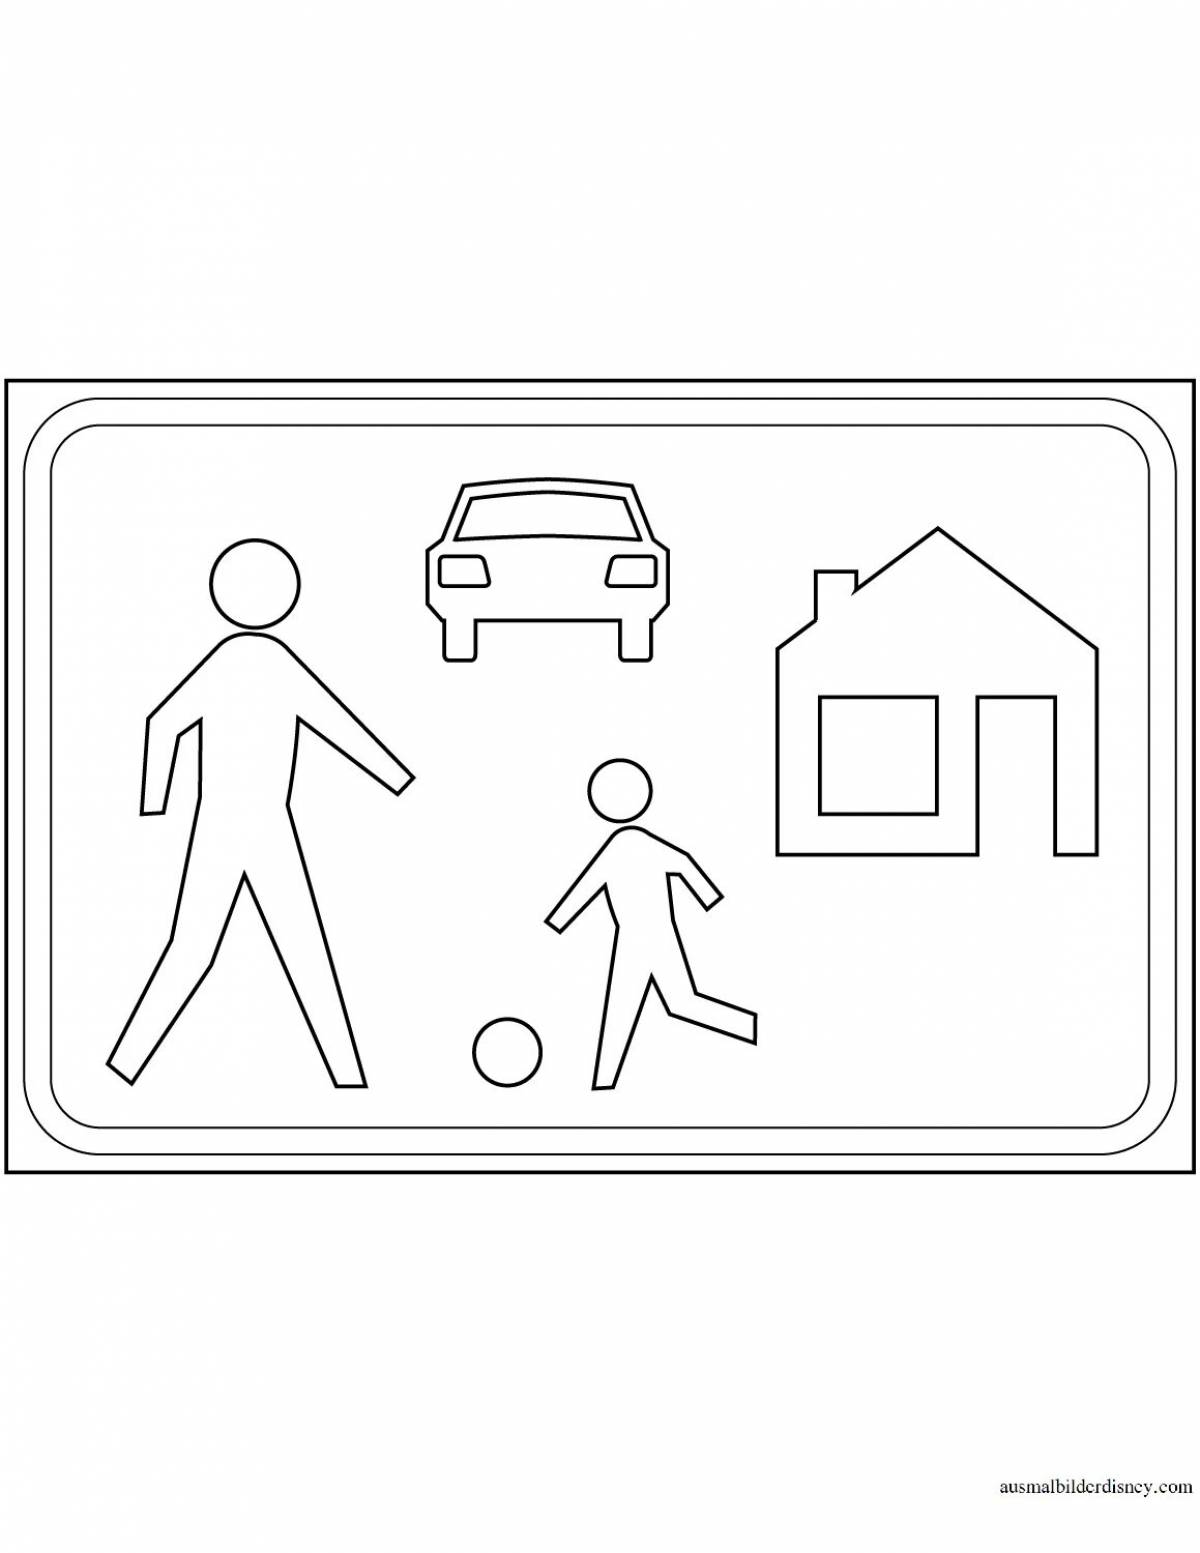 Coloring page sign 